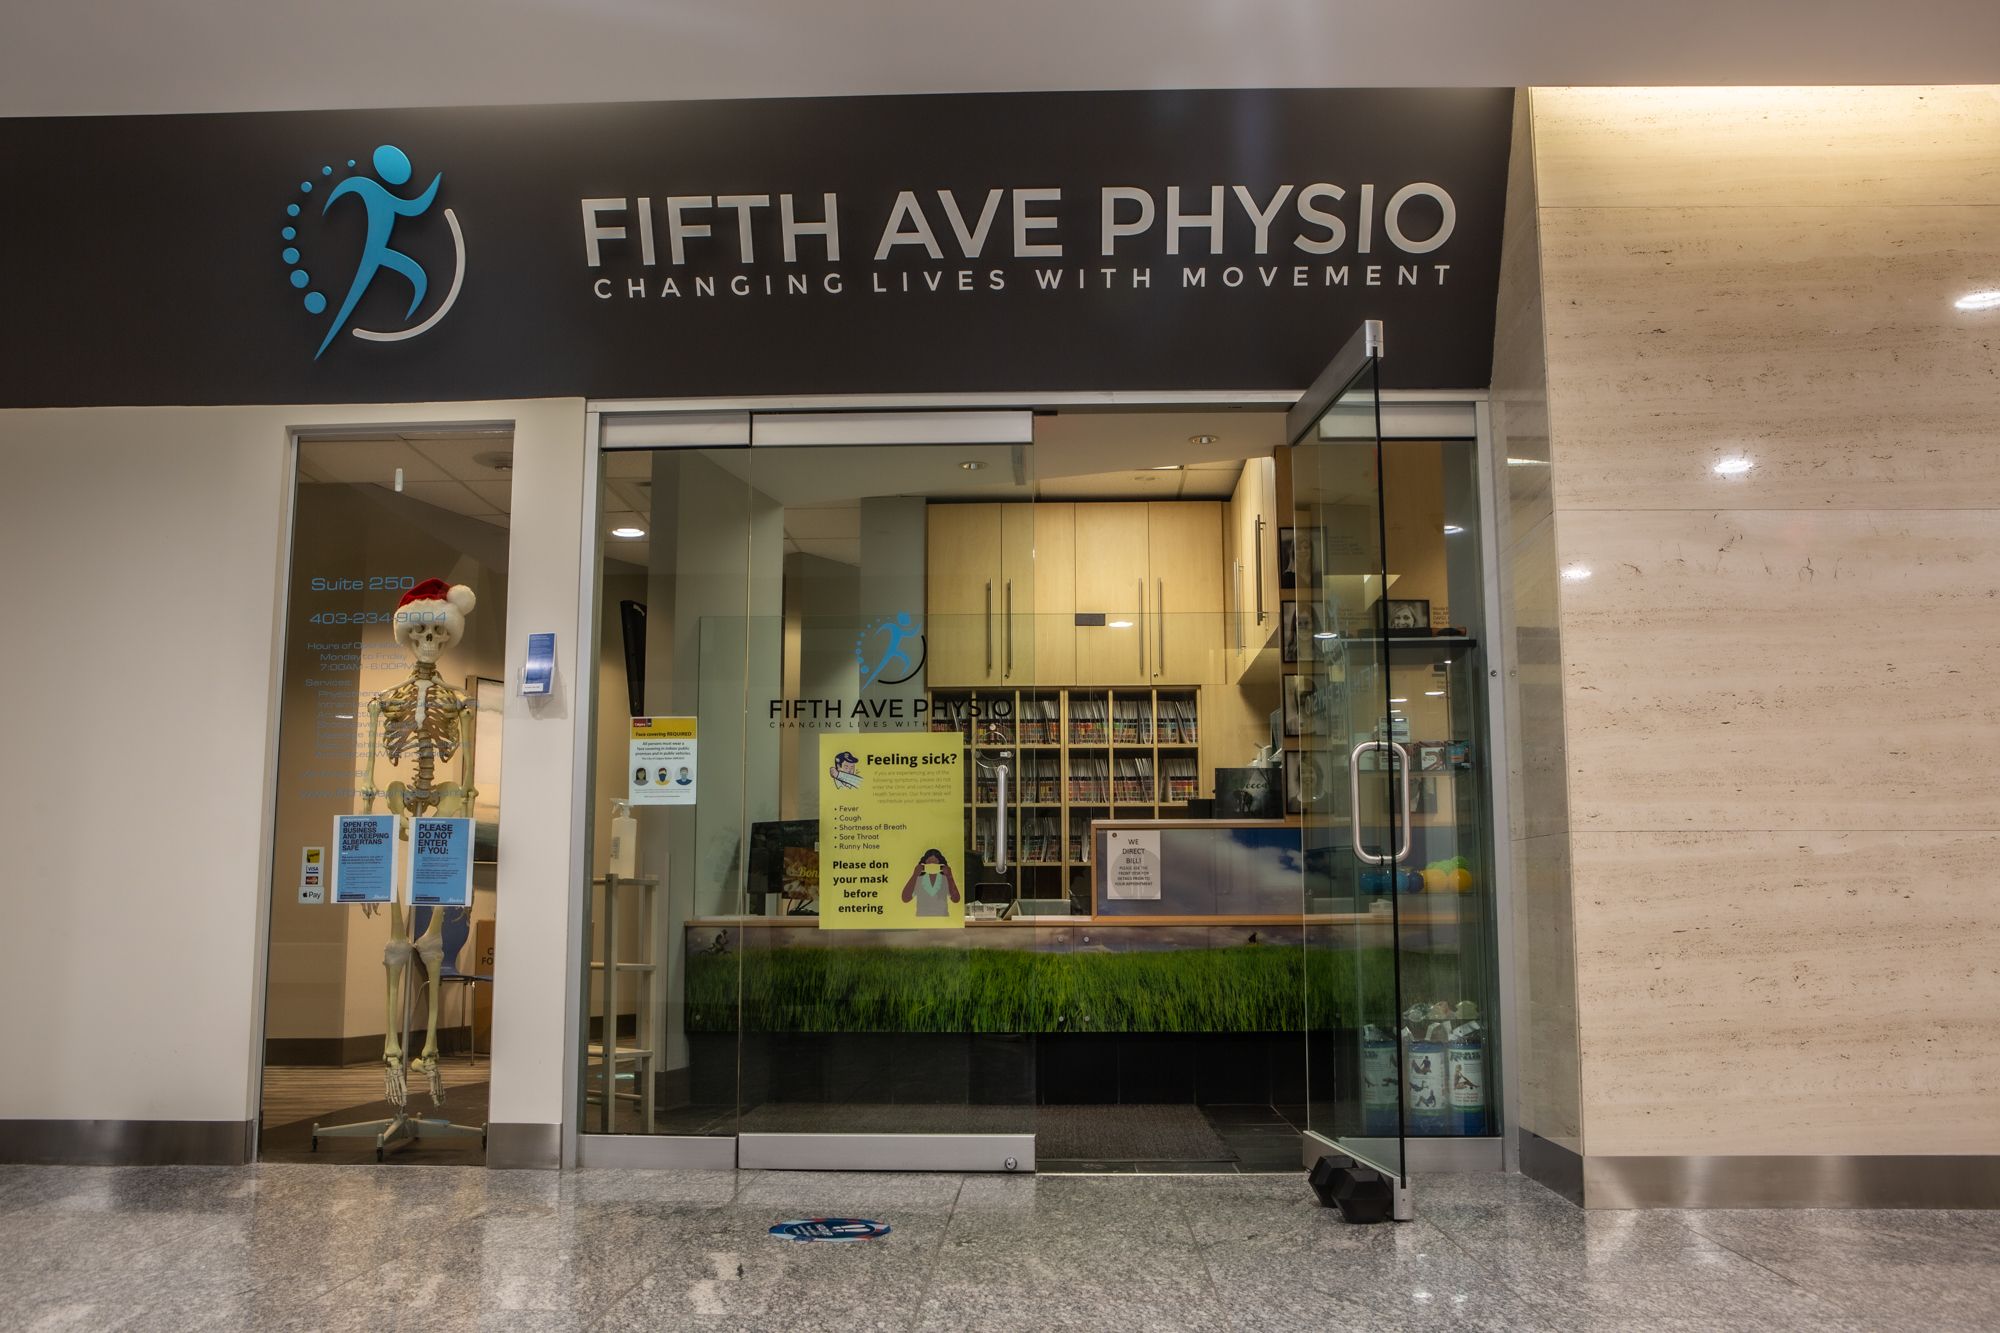 Changing Lives With Movement - Fifth Avenue Physiotherapy